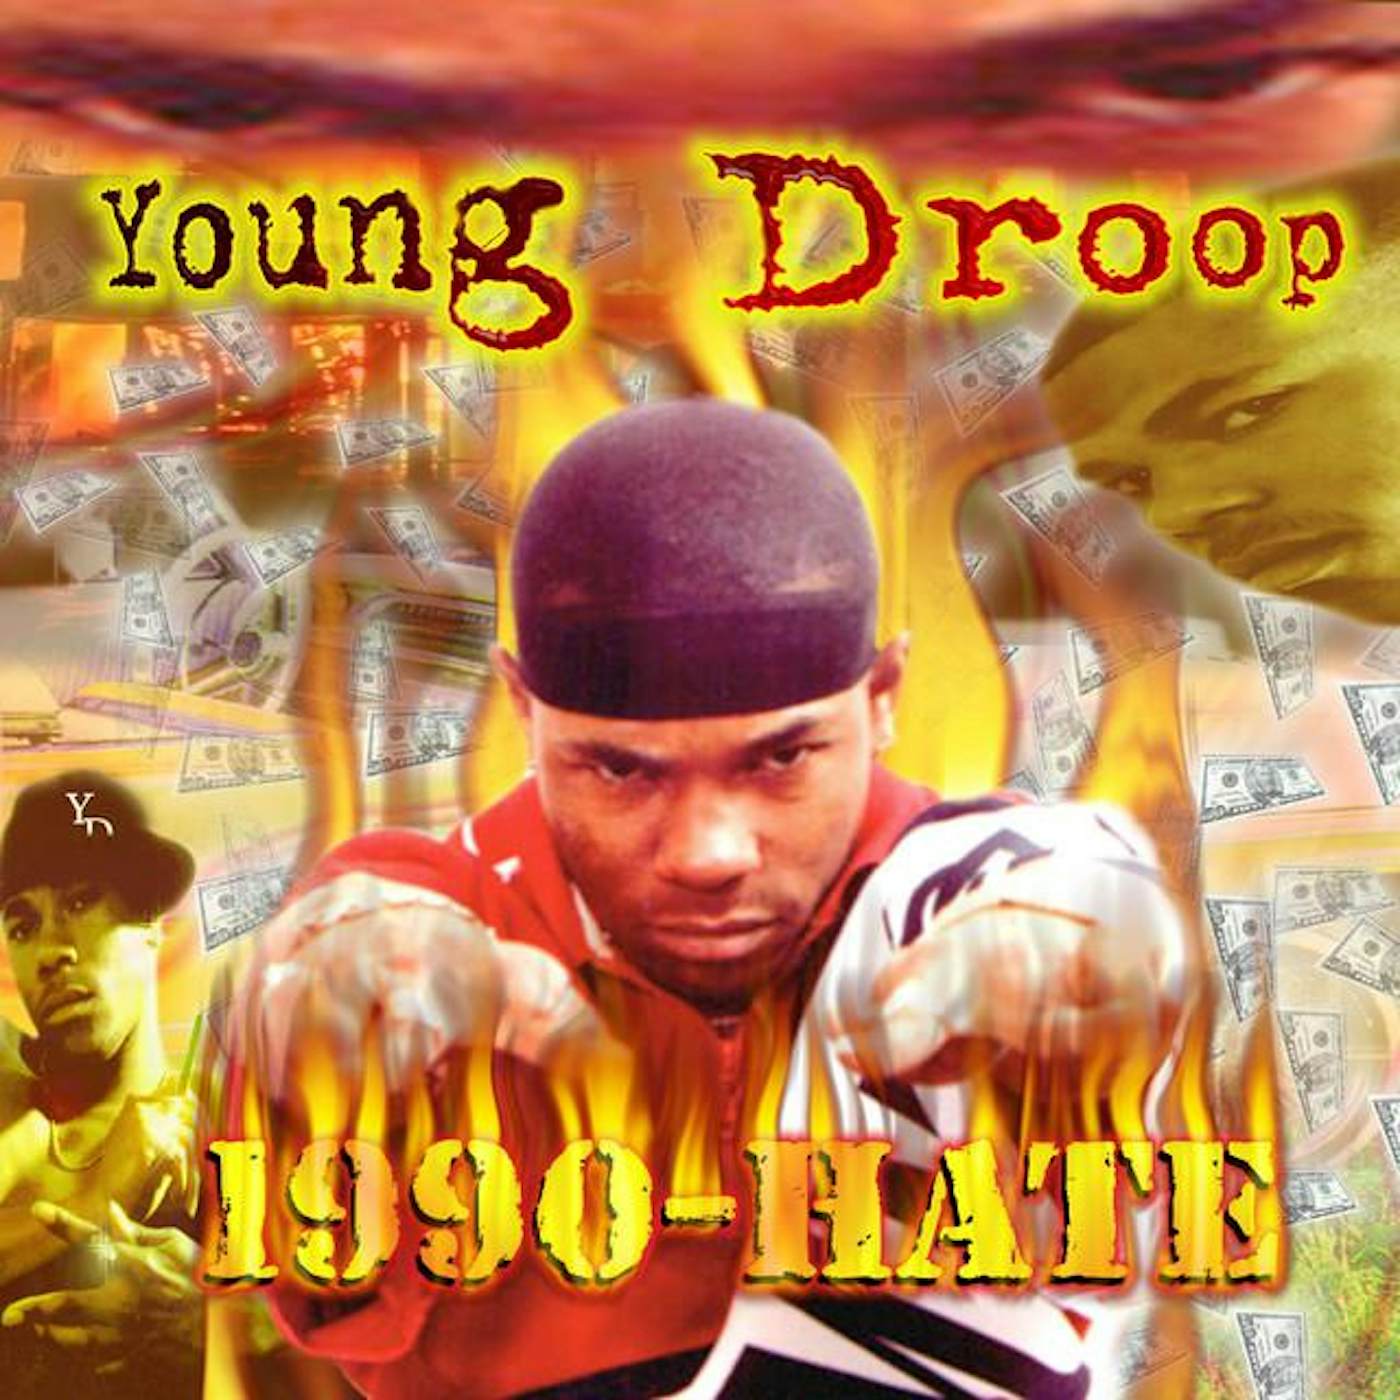 Young Droop